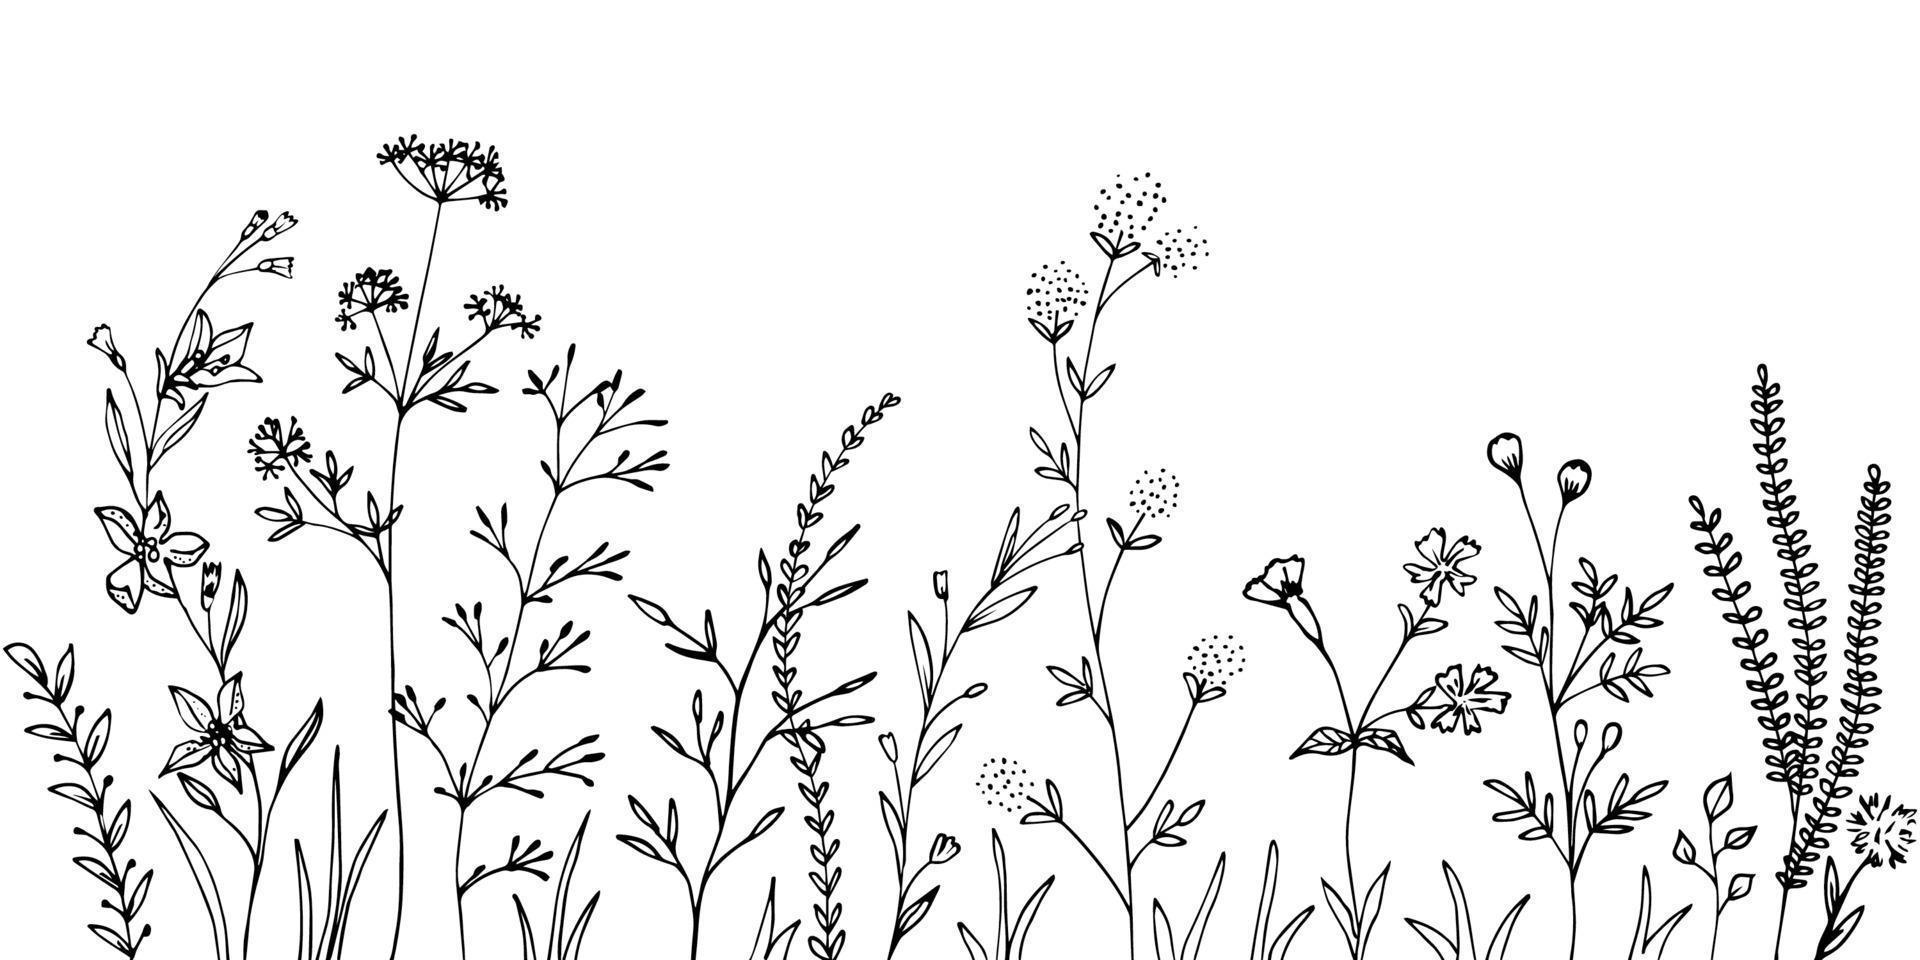 Black silhouettes of grass, flowers and herbs. vector